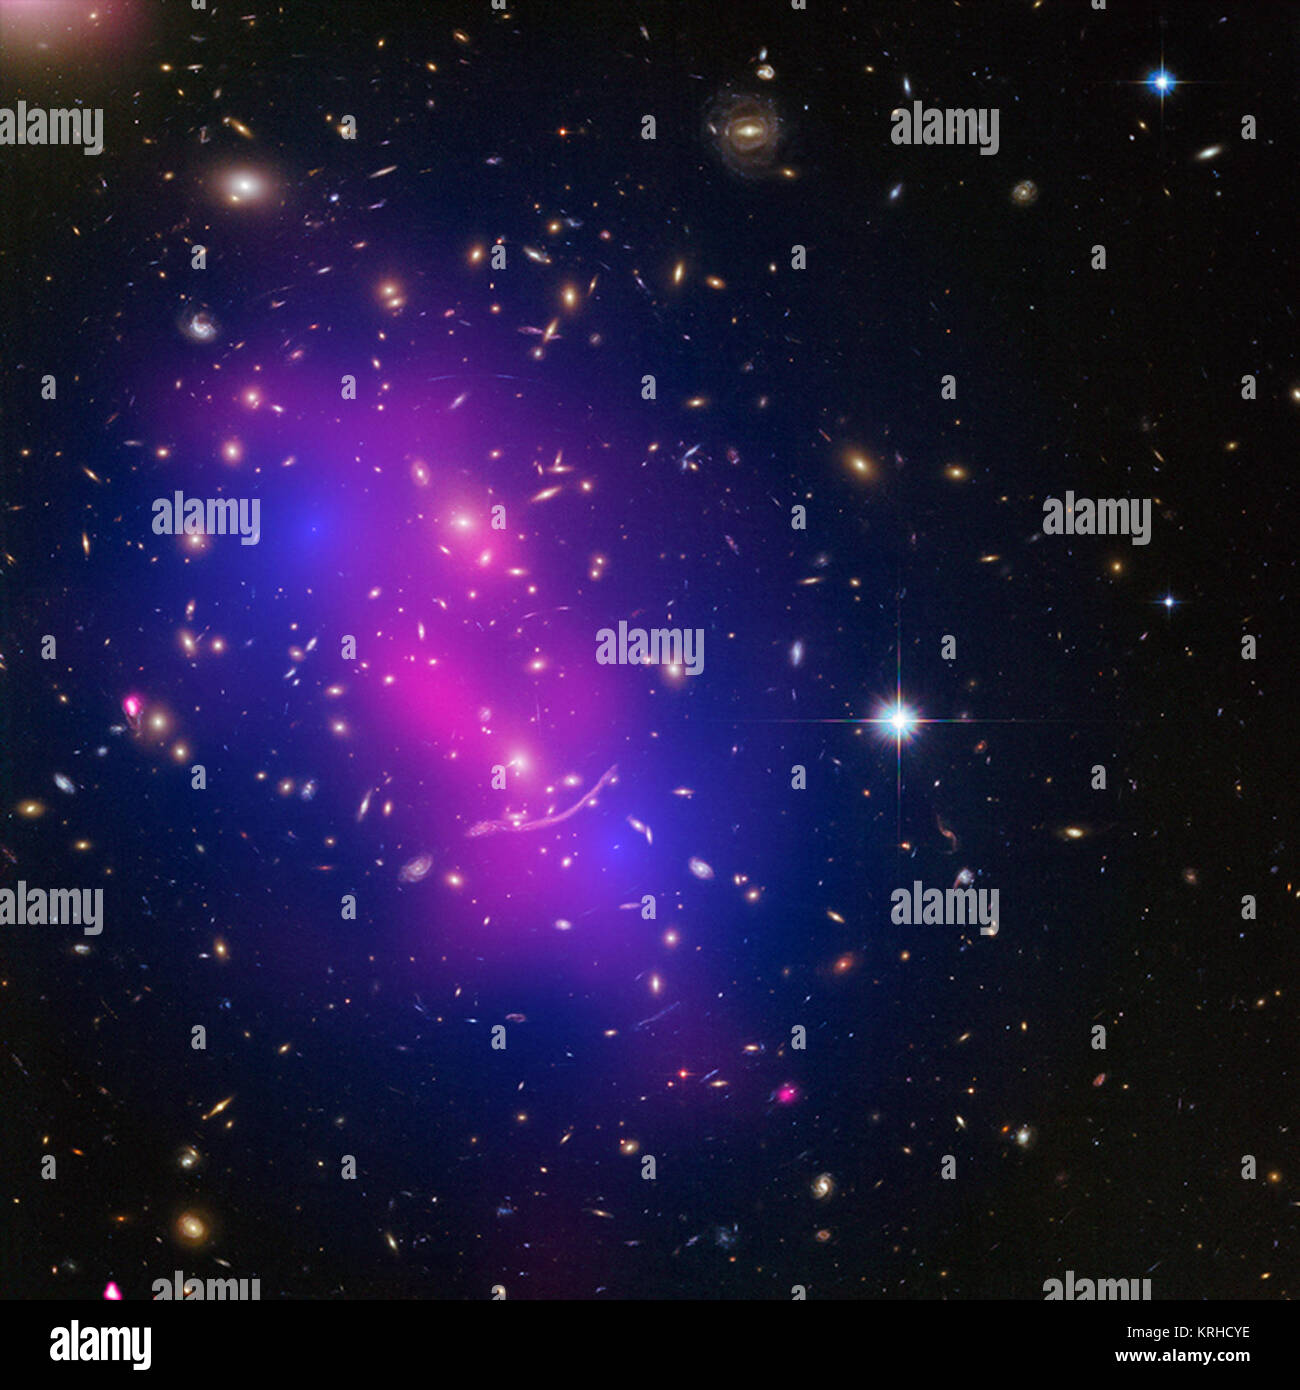 These galaxy clusters are part of a large study using Chandra and Hubble that sets new limits on how dark matter - the mysterious substance that makes up most of the matter in the Universe - interacts with itself. The hot gas that envelopes the clusters glows brightly in X-rays detected by Chandra (pink). When combined with Hubble's visible light data, astronomers can map where the stars and hot gas are after the collision, as well as the inferred distribution of dark matter (blue) through the effect of gravitational lensing. Abell 370 (Chandra) dark a370 Stock Photo